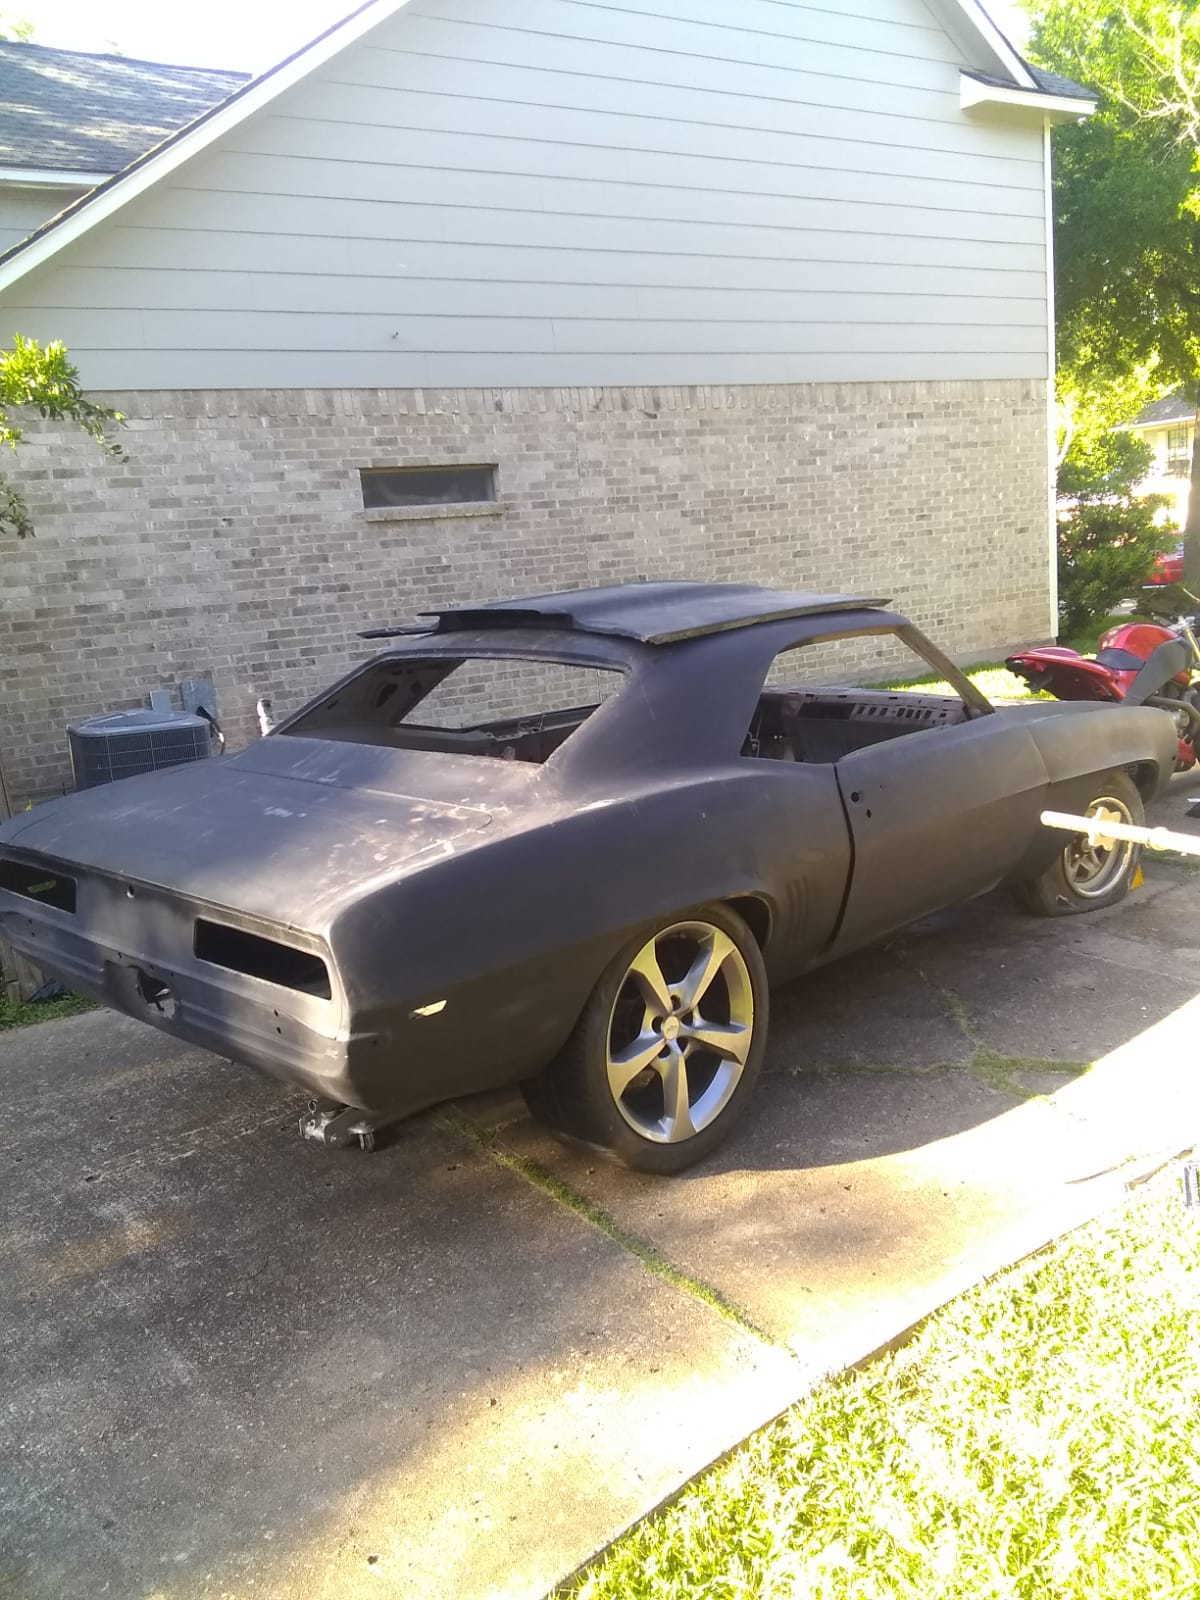 1969 Camaro SS project car for sale - Camaro Forums ...